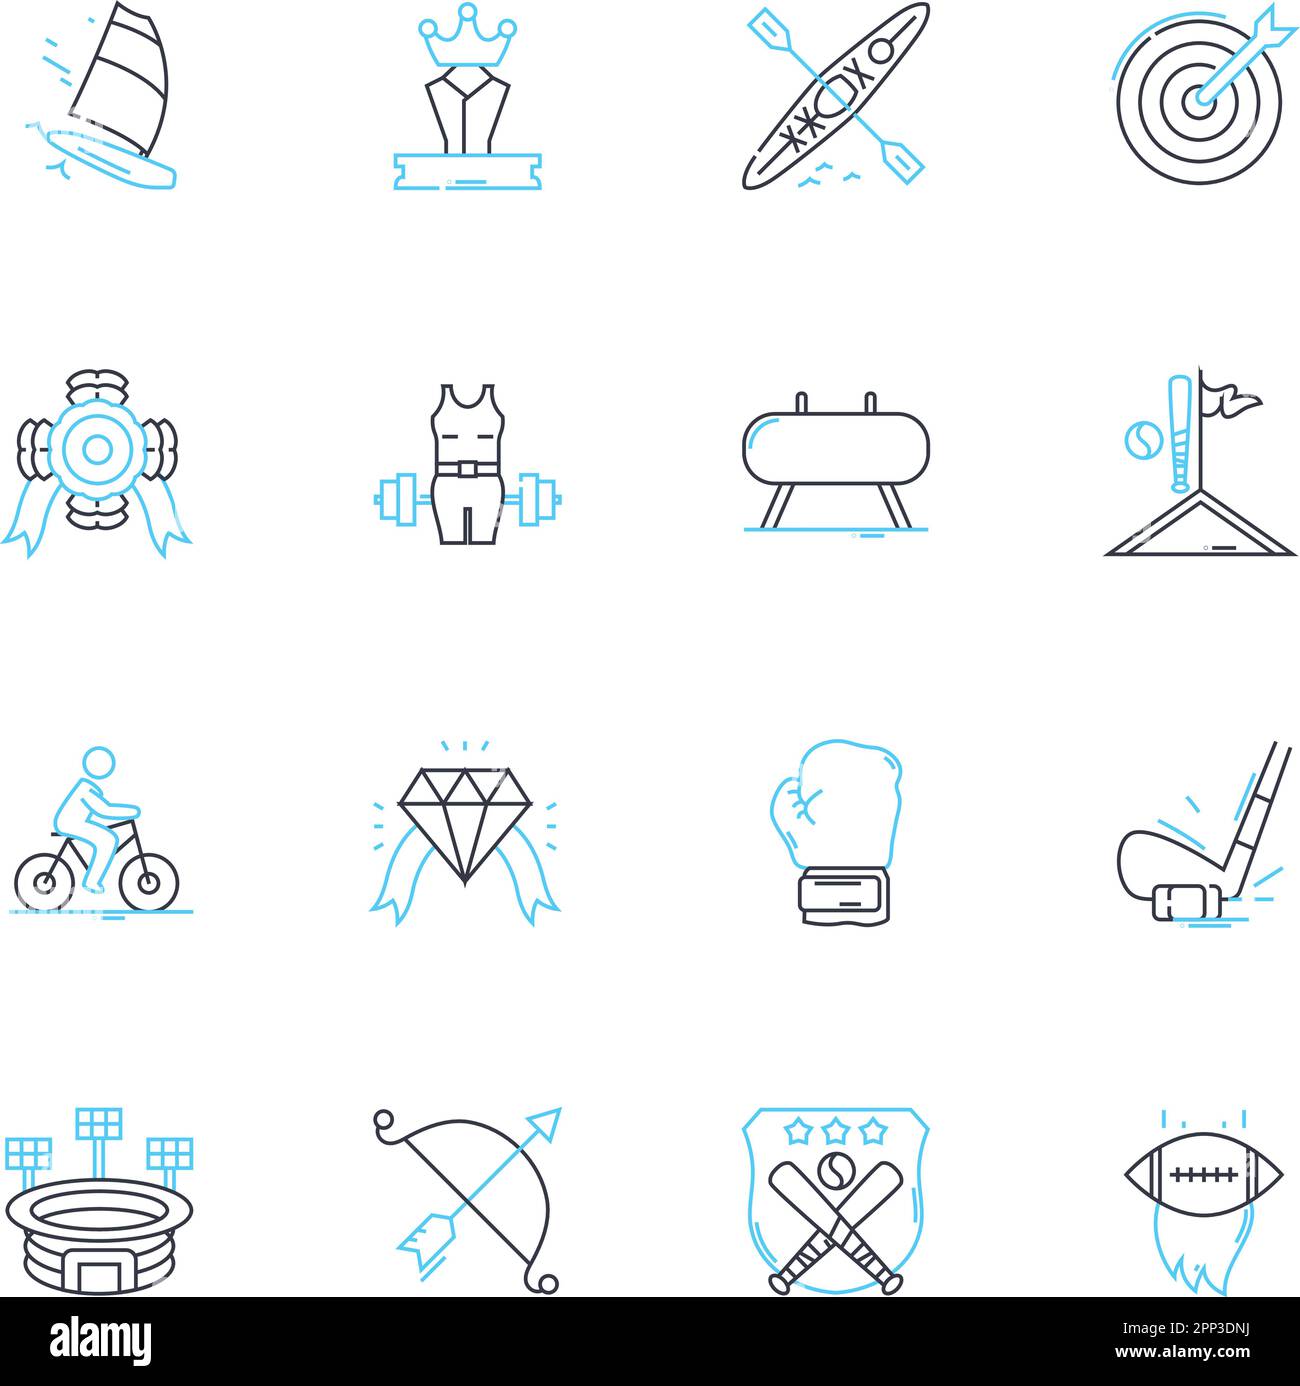 Guidance Supervision linear icons set. Coaching, Mentorship, Direction, Leadership, Support, Management, Control line vector and concept signs Stock Vector